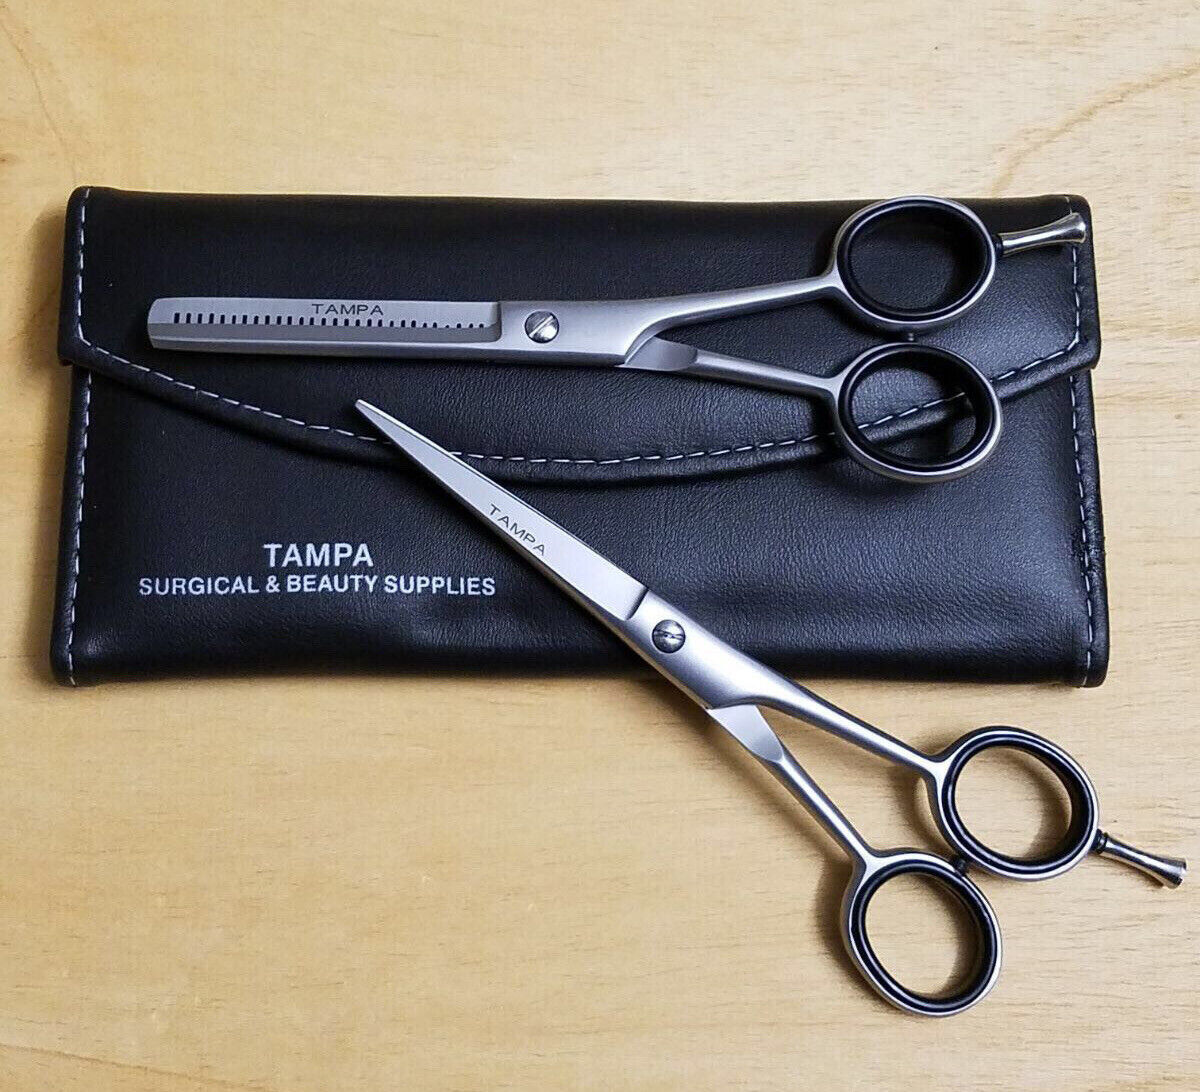 6" Professional Hair Cutting Japanese Scissors Thinning Barber Shears Set Kit Tampa Surgical and Beauty Supplies Does Not Apply - фотография #3